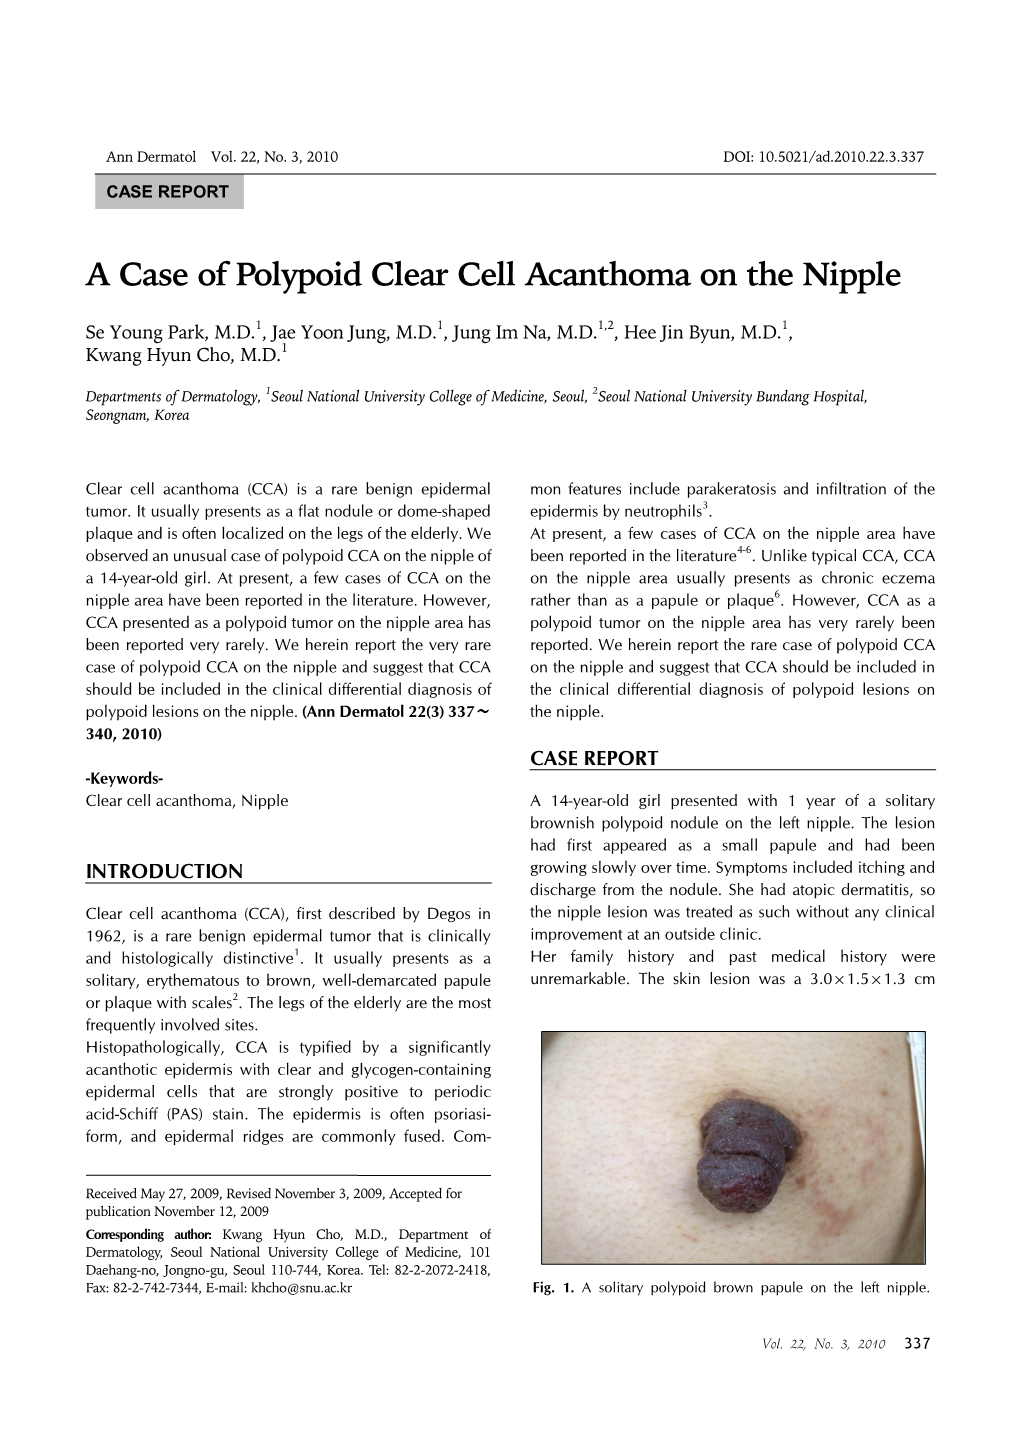 A Case of Polypoid Clear Cell Acanthoma on the Nipple